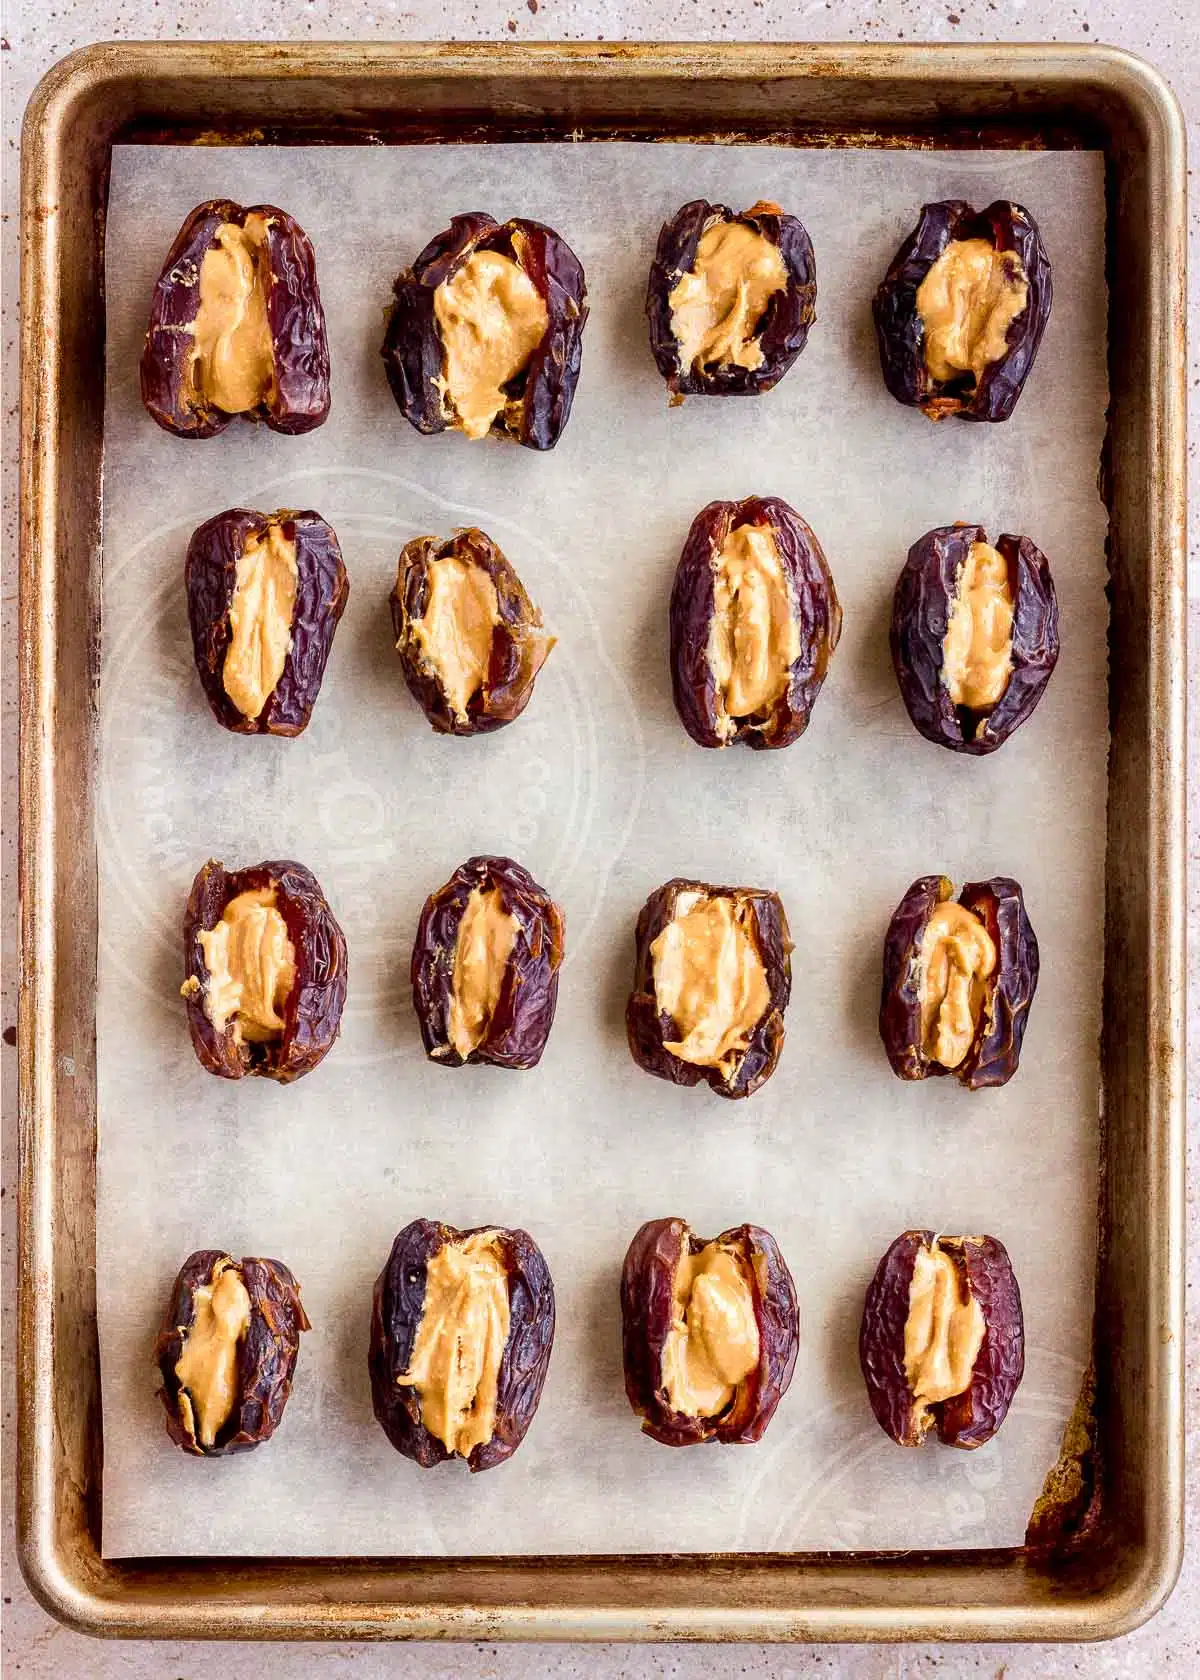 Dates stuffed with peanut butter on a baking tray.